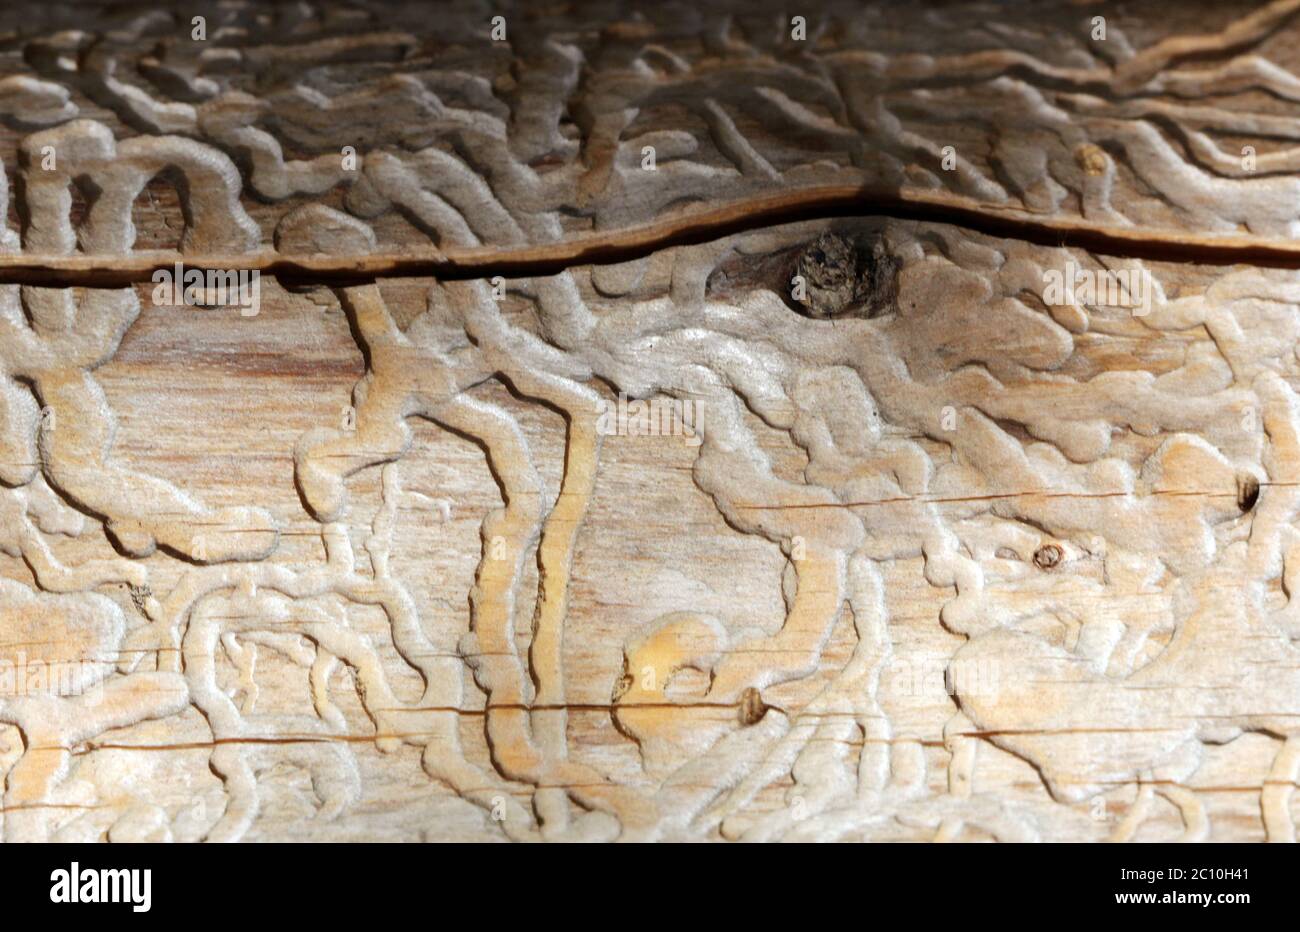 Traces of beetles under the bark on a spruce tree Stock Photo